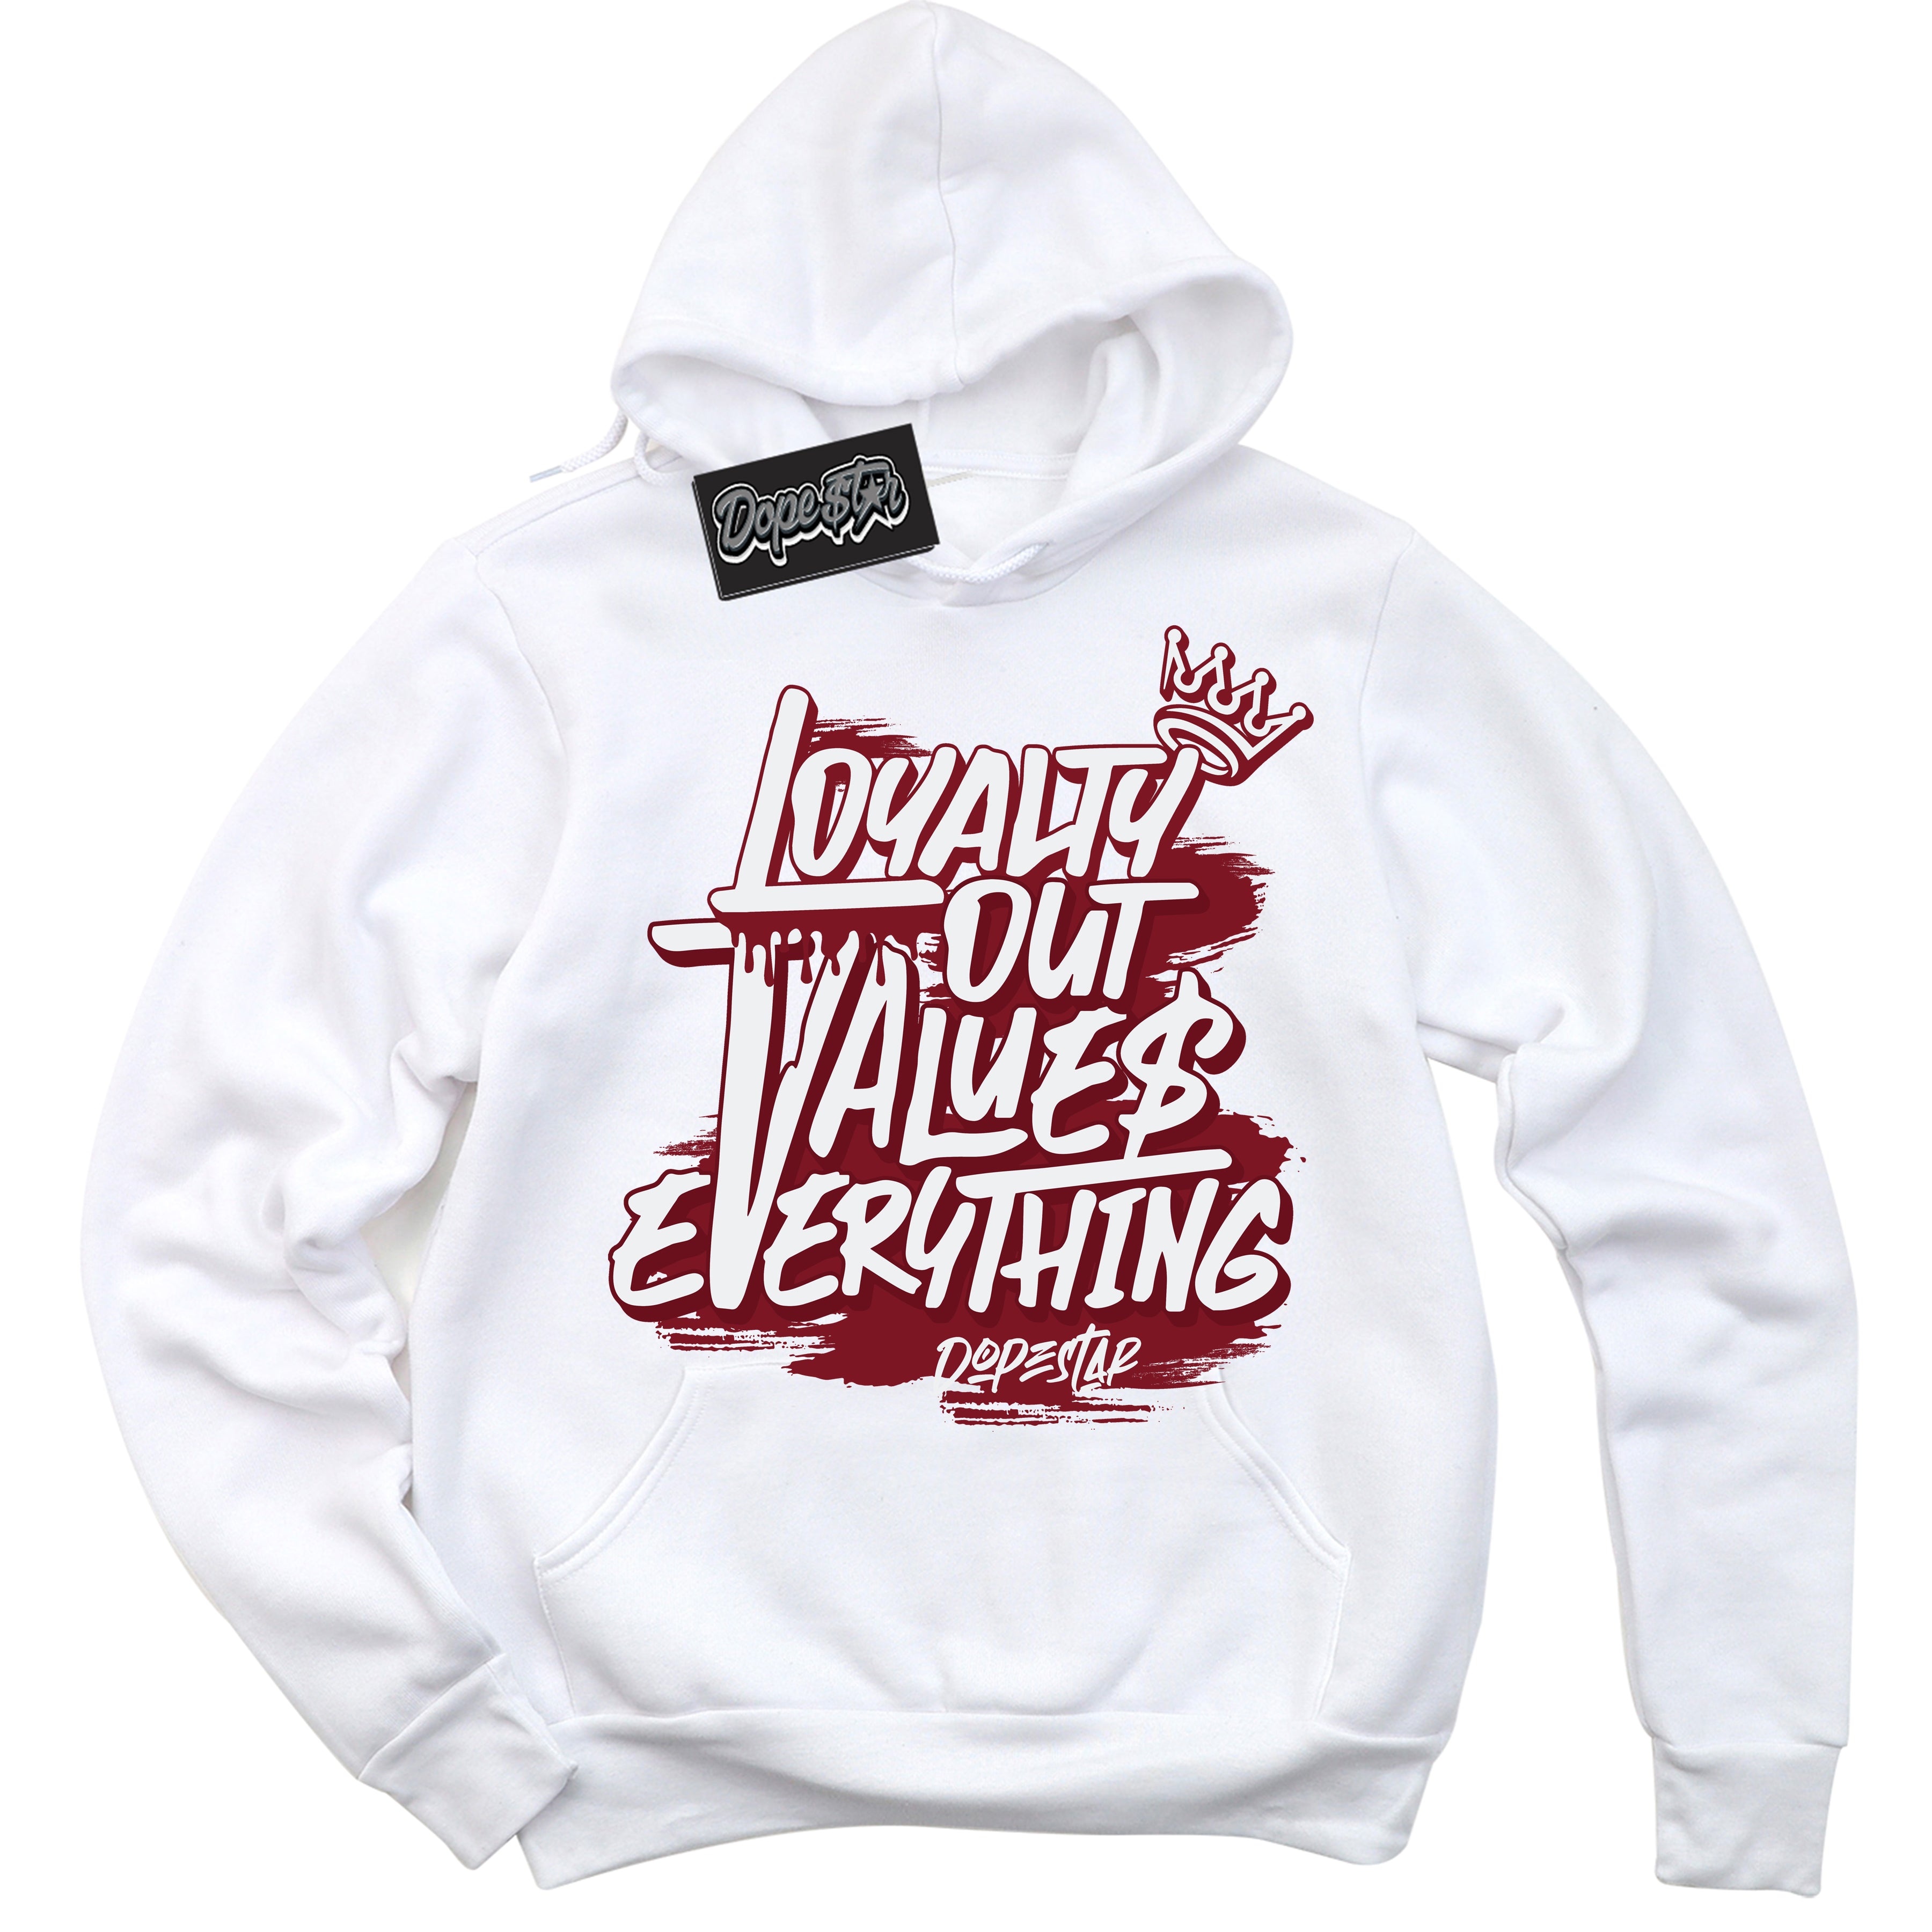 Cool White Hoodie with “ Loyalty Out Values Everything ”  design that Perfectly Matches Metallic Burgundy 1s Sneakers.